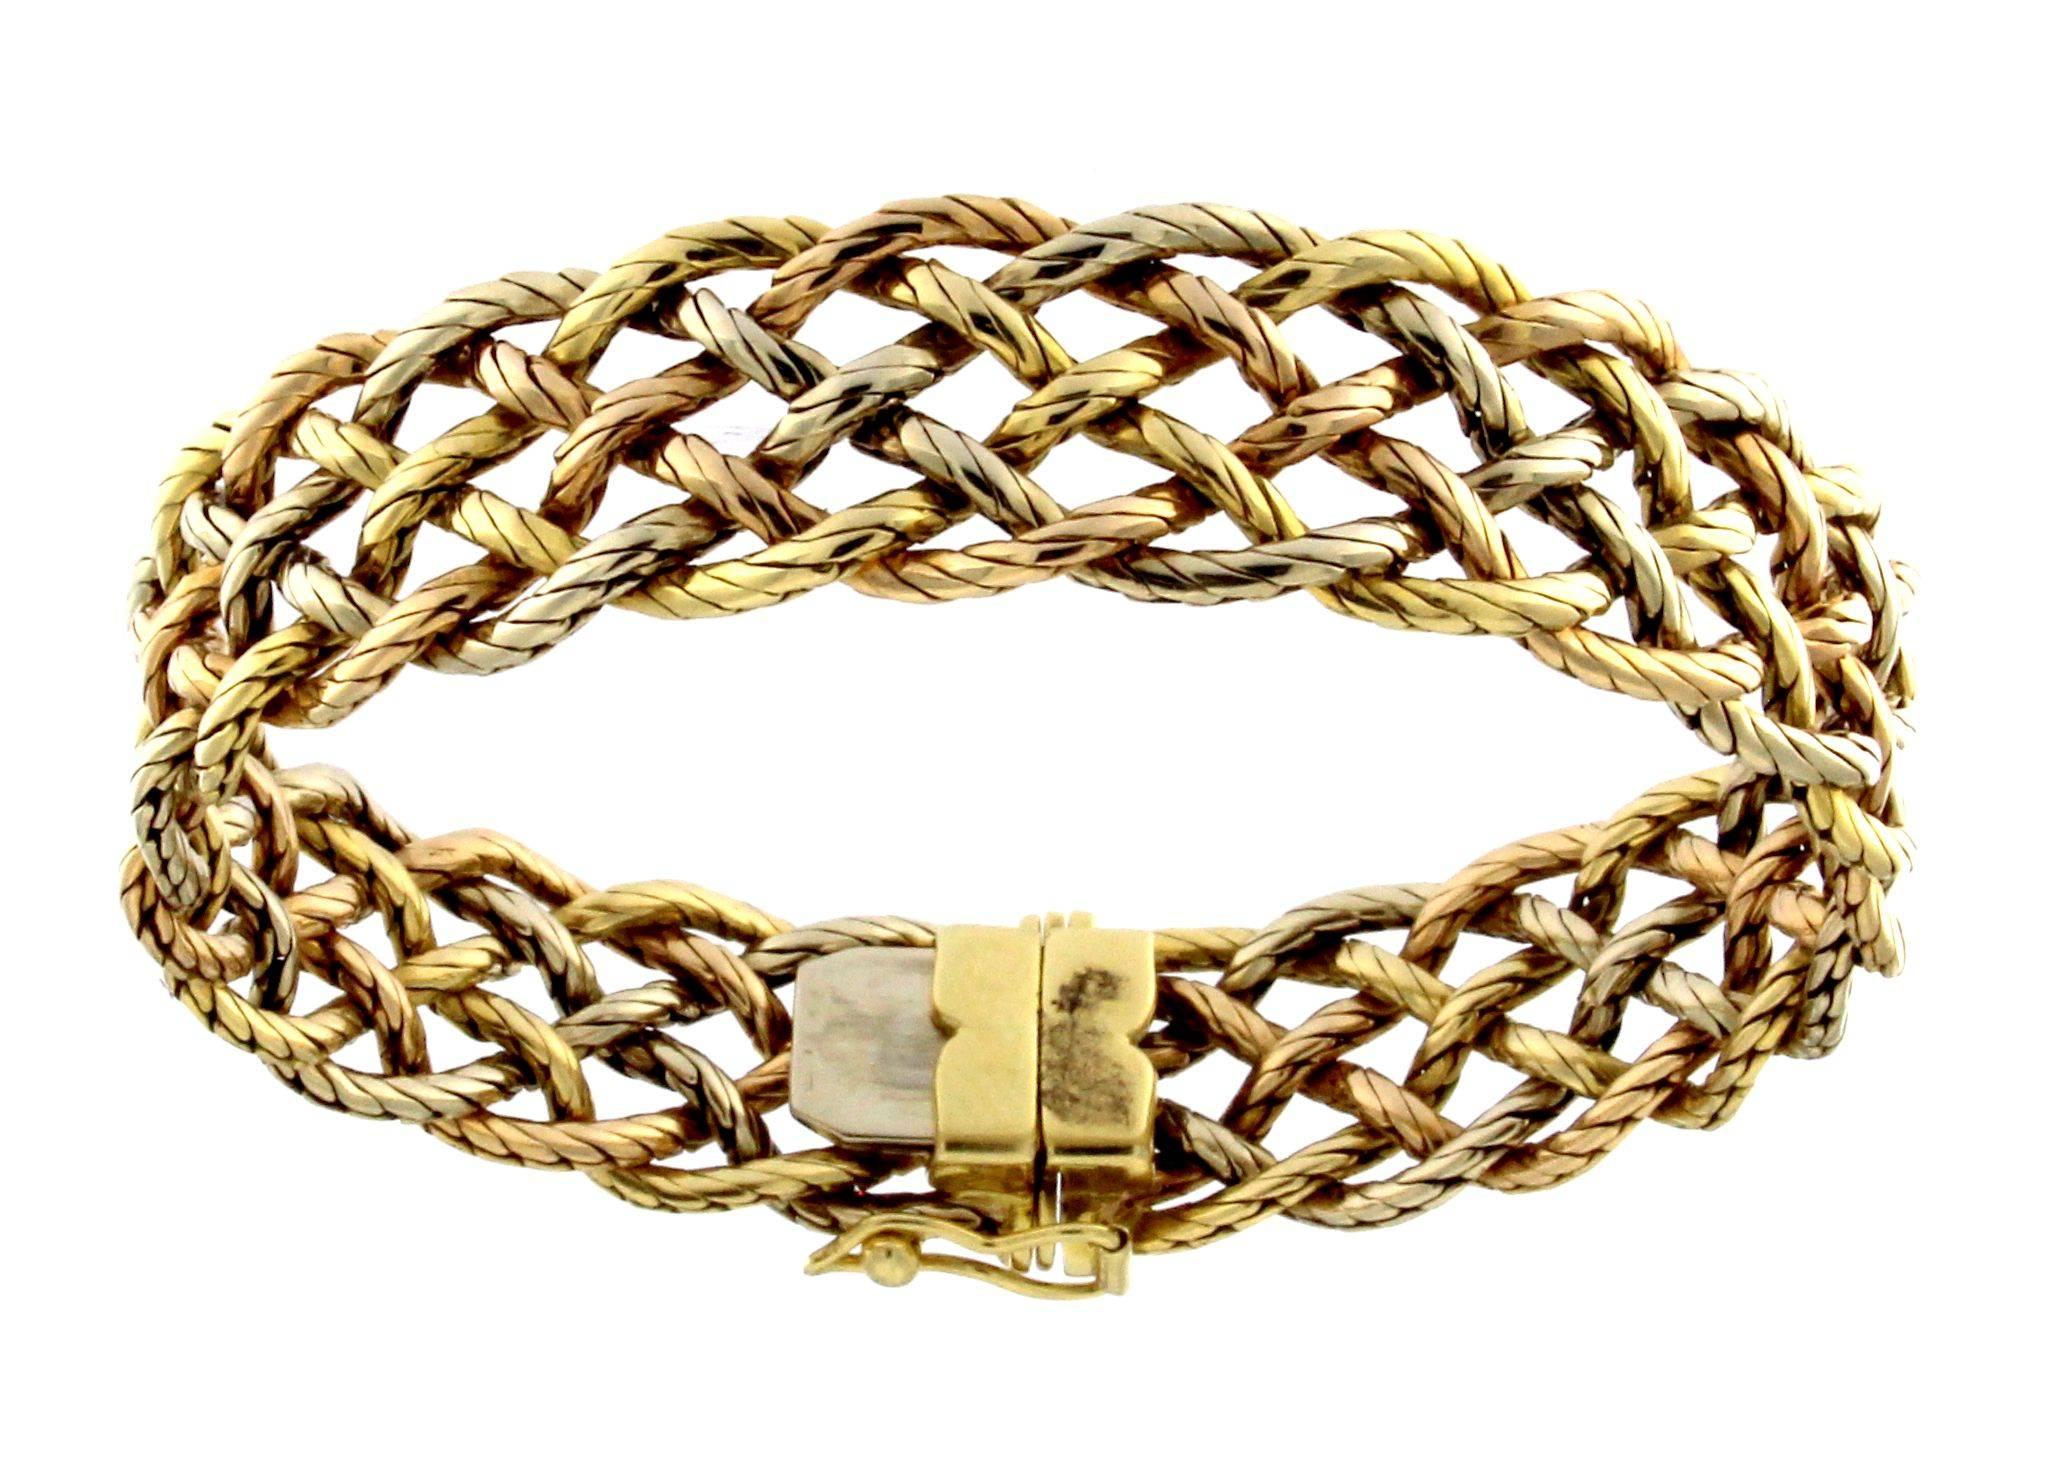 Small size mesh bracelet in three color gold
6 wires 18 KT GOLD mm. 20 linear with ratchet closure 
Total weight gr 47,2
Stamp ITALY 10 MI 750